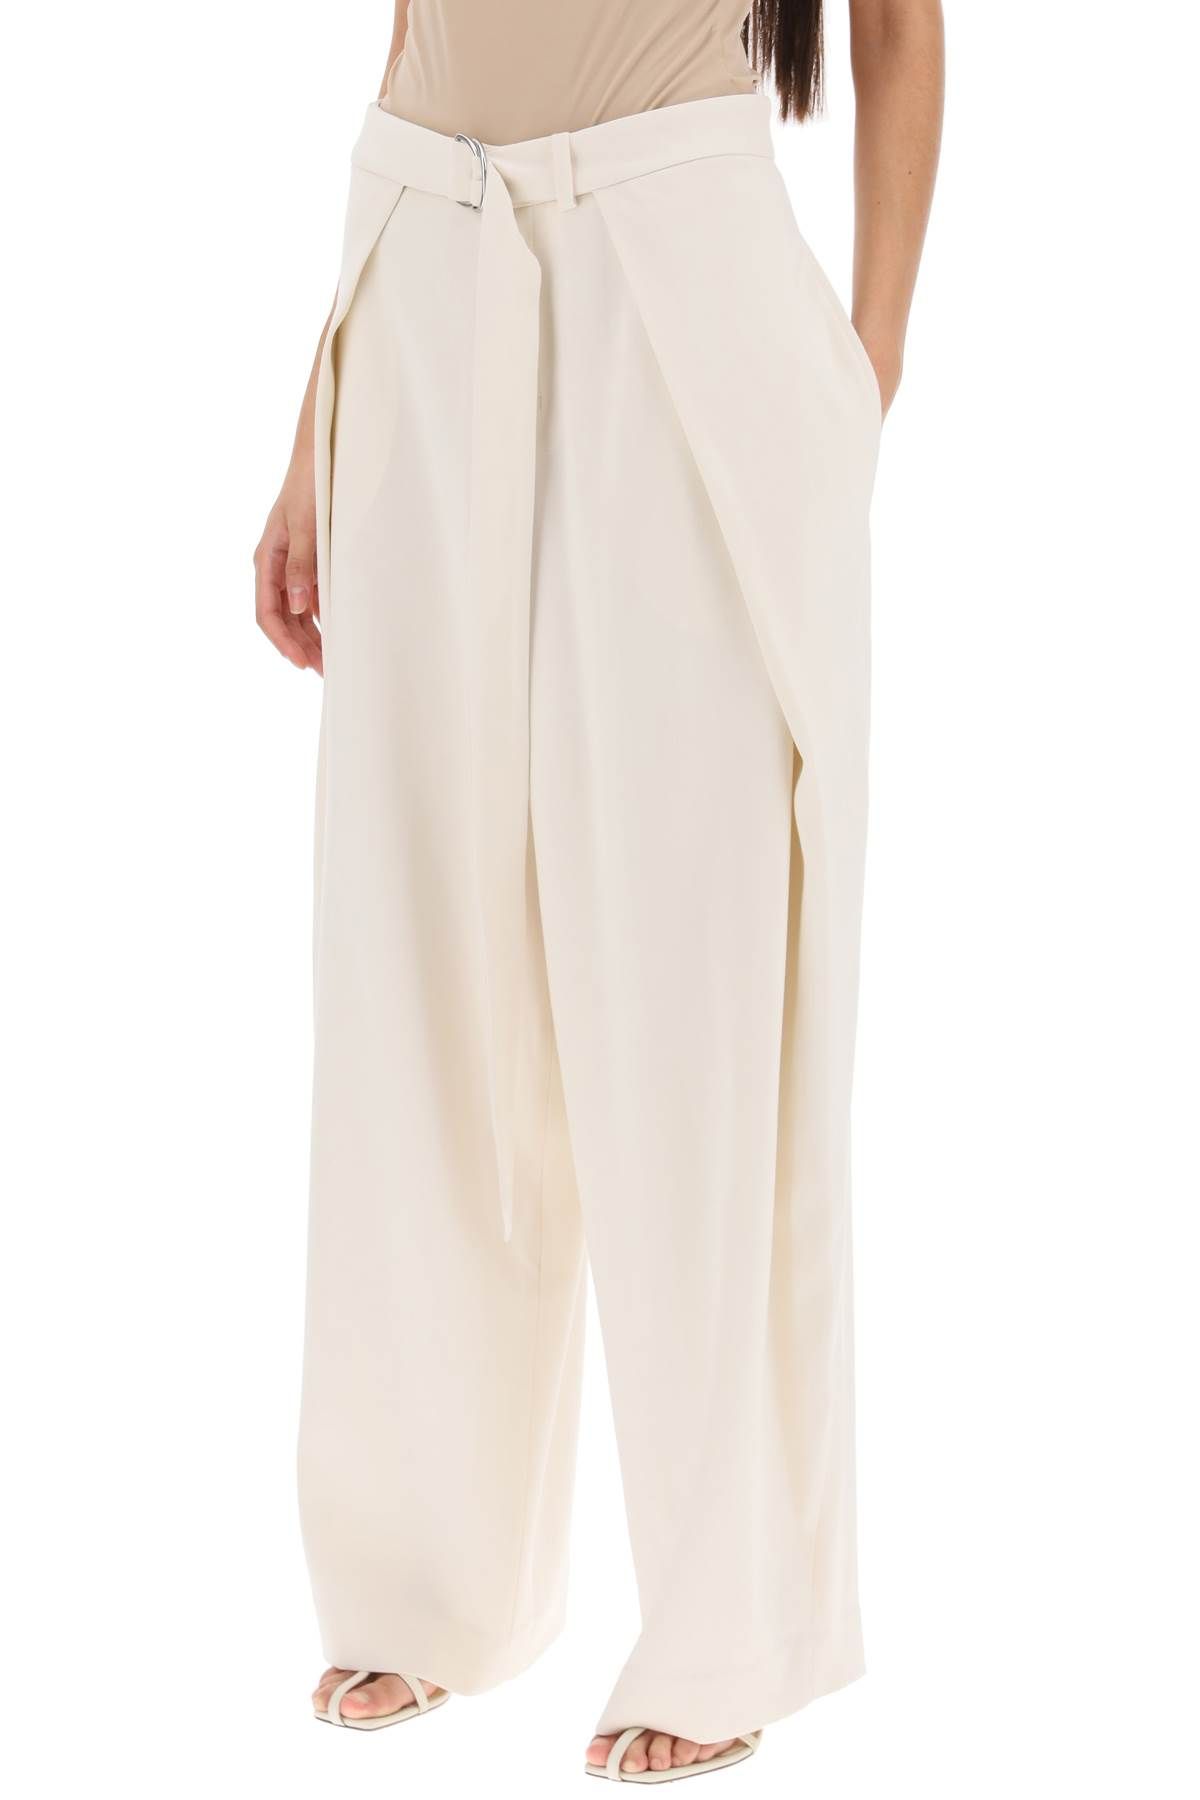 Shop Ami Alexandre Mattiussi Wide Fit Pants With Floating Panels In White